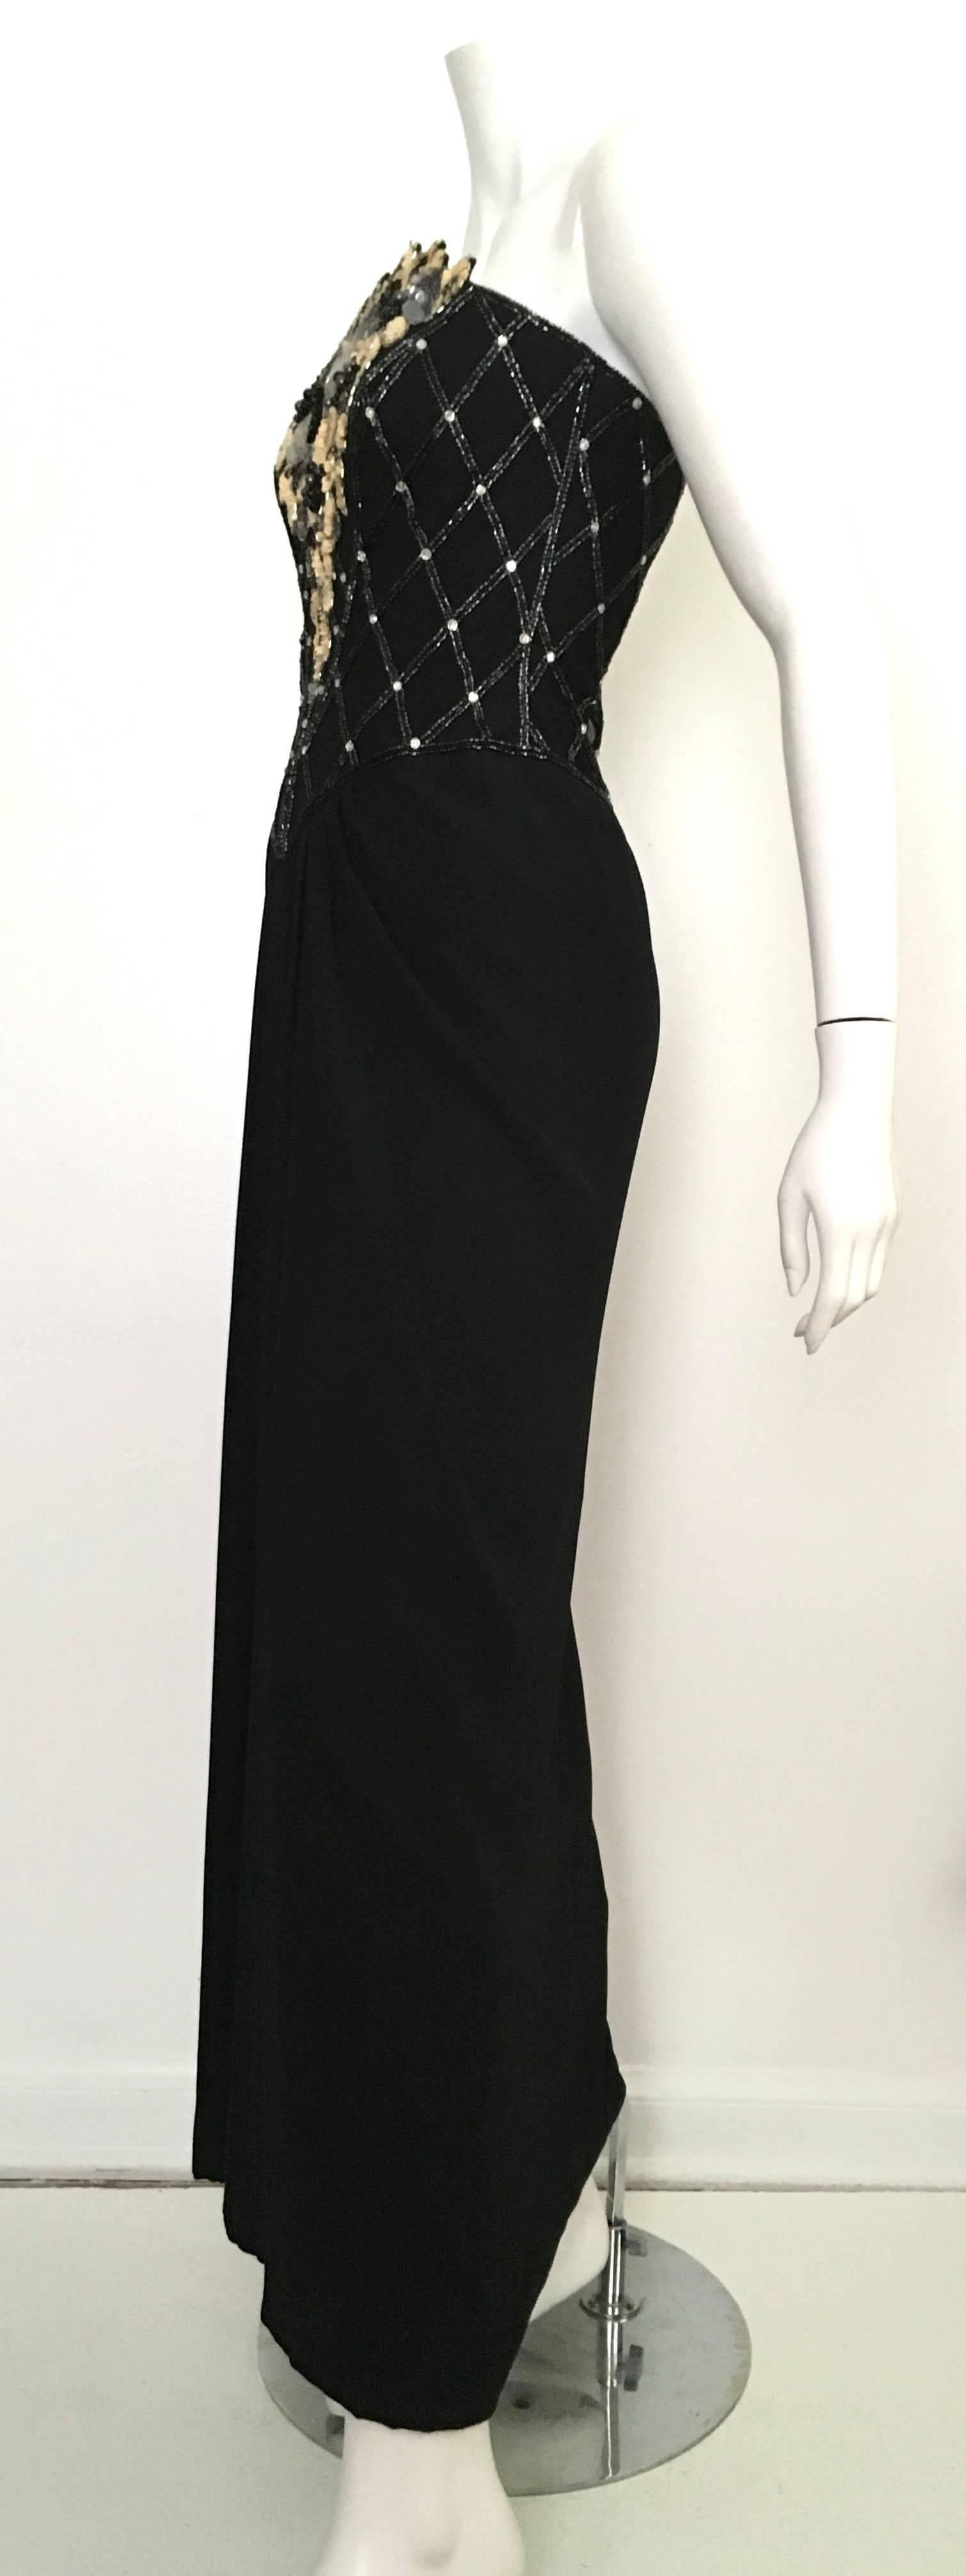 Bob Mackie Black Sequin Strapless Gown Size 6. 4